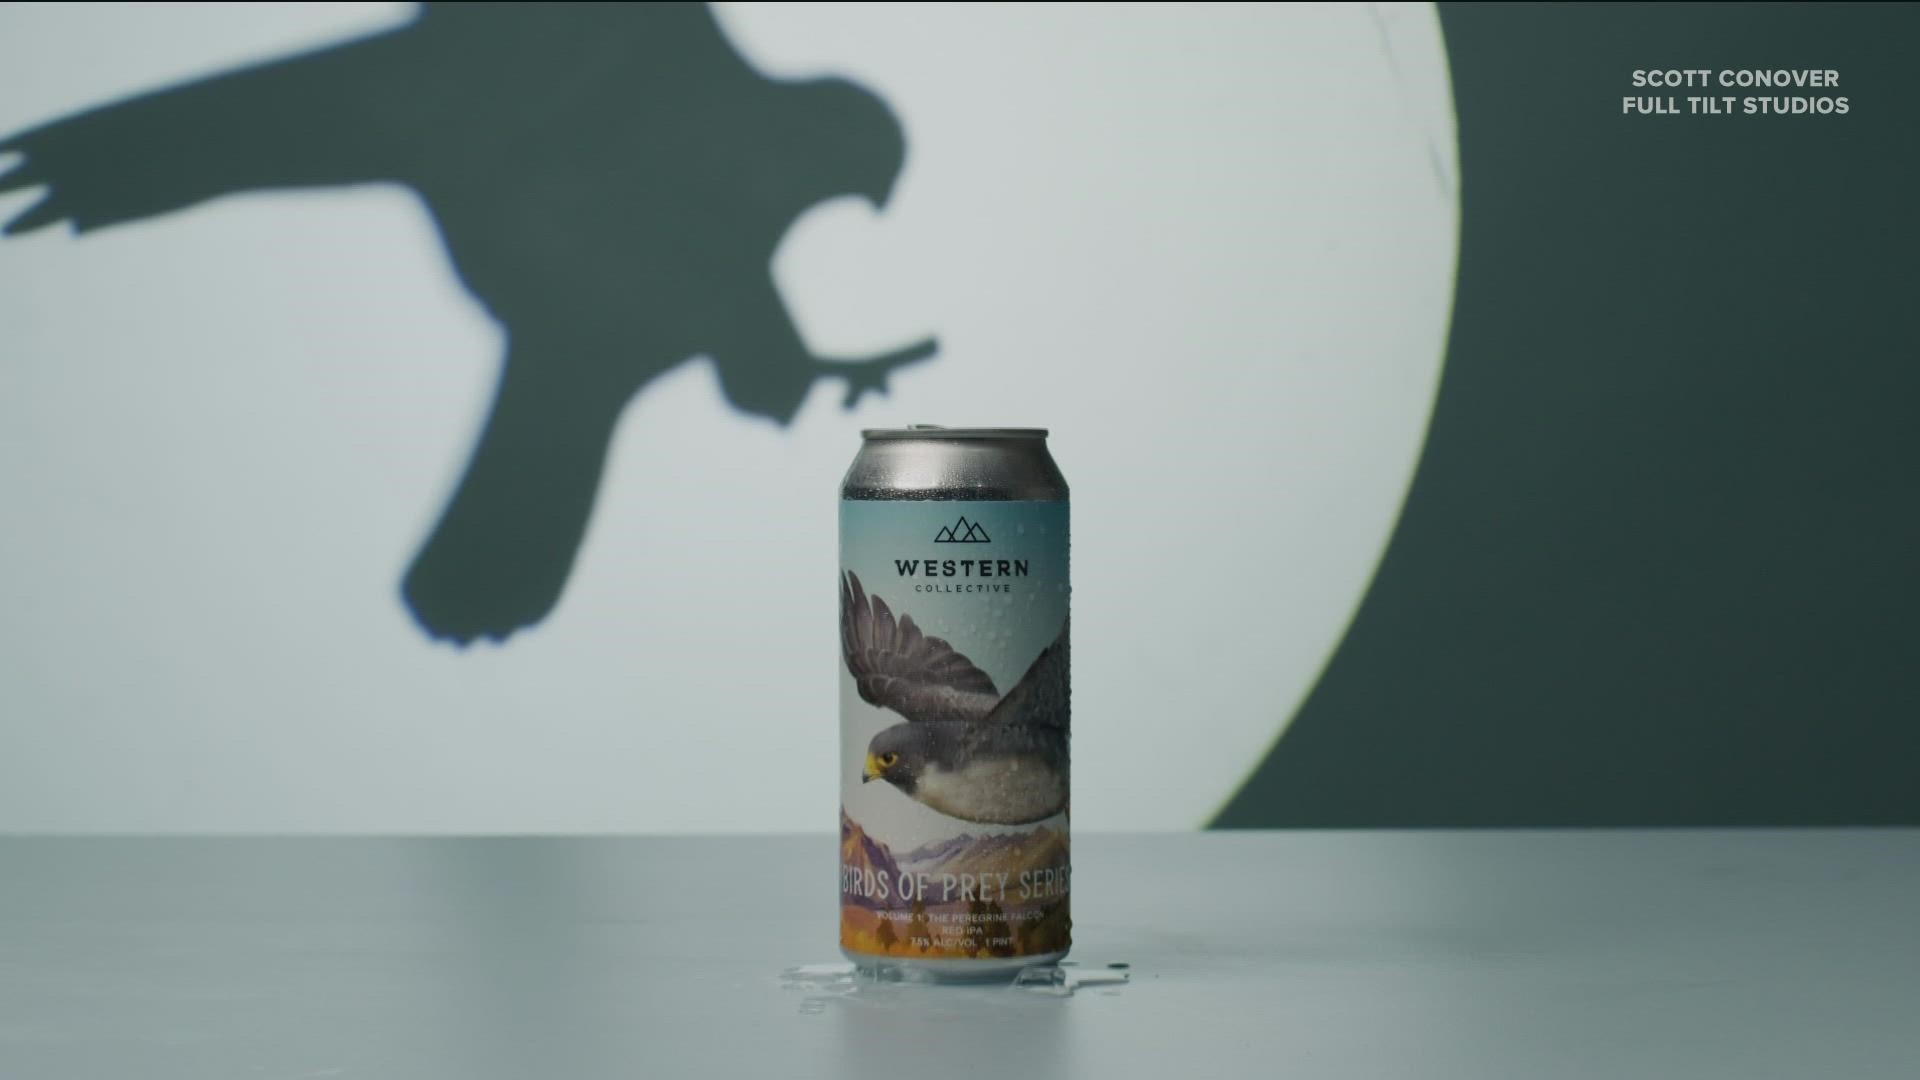 Peregrine Falcon, a red IPA, is the first of the series, featured Thursday from 5 to 7 p.m. at Western Collective's launch celebration in Garden City.